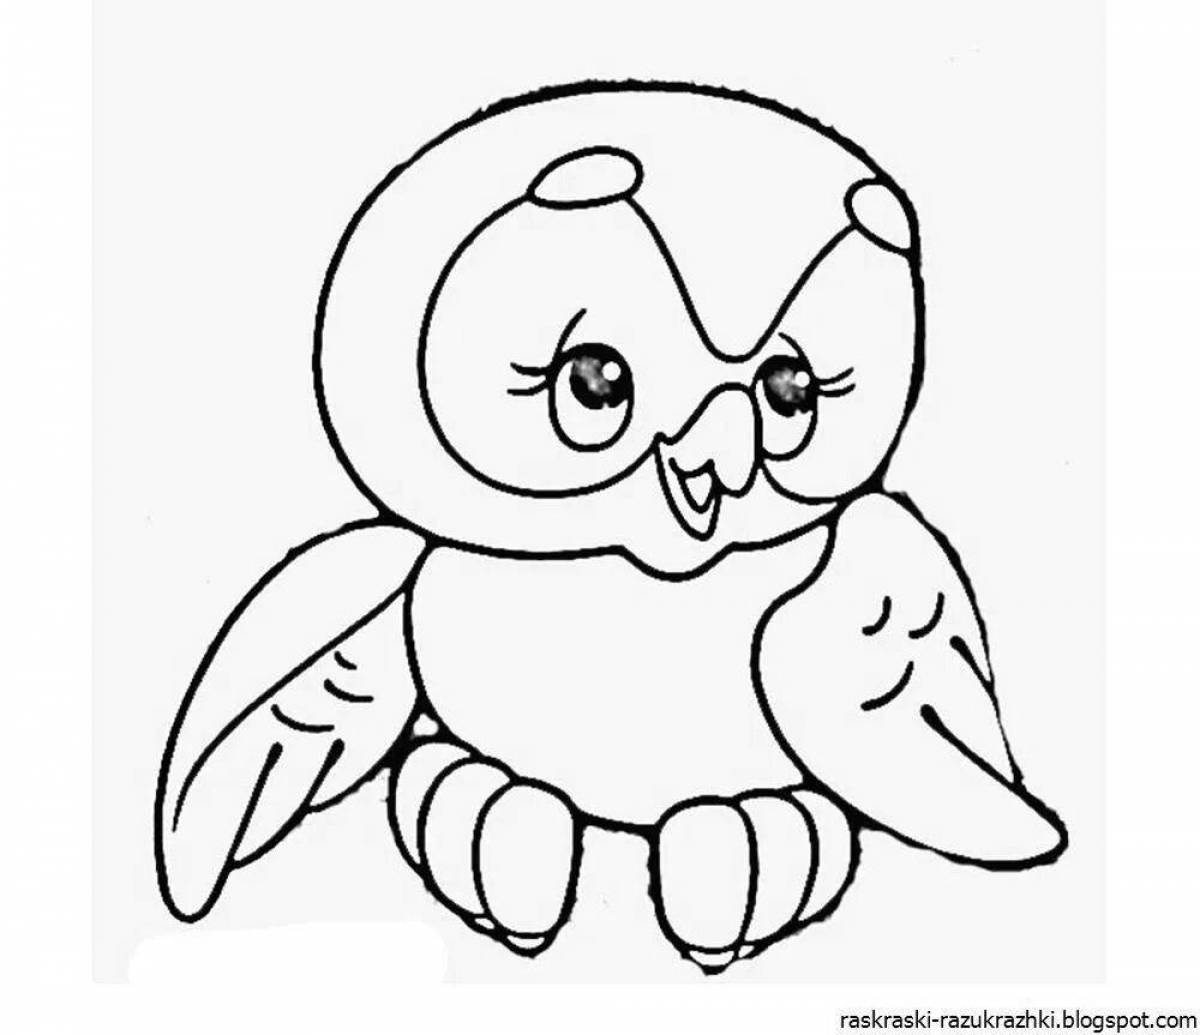 A funny owl coloring book for kids